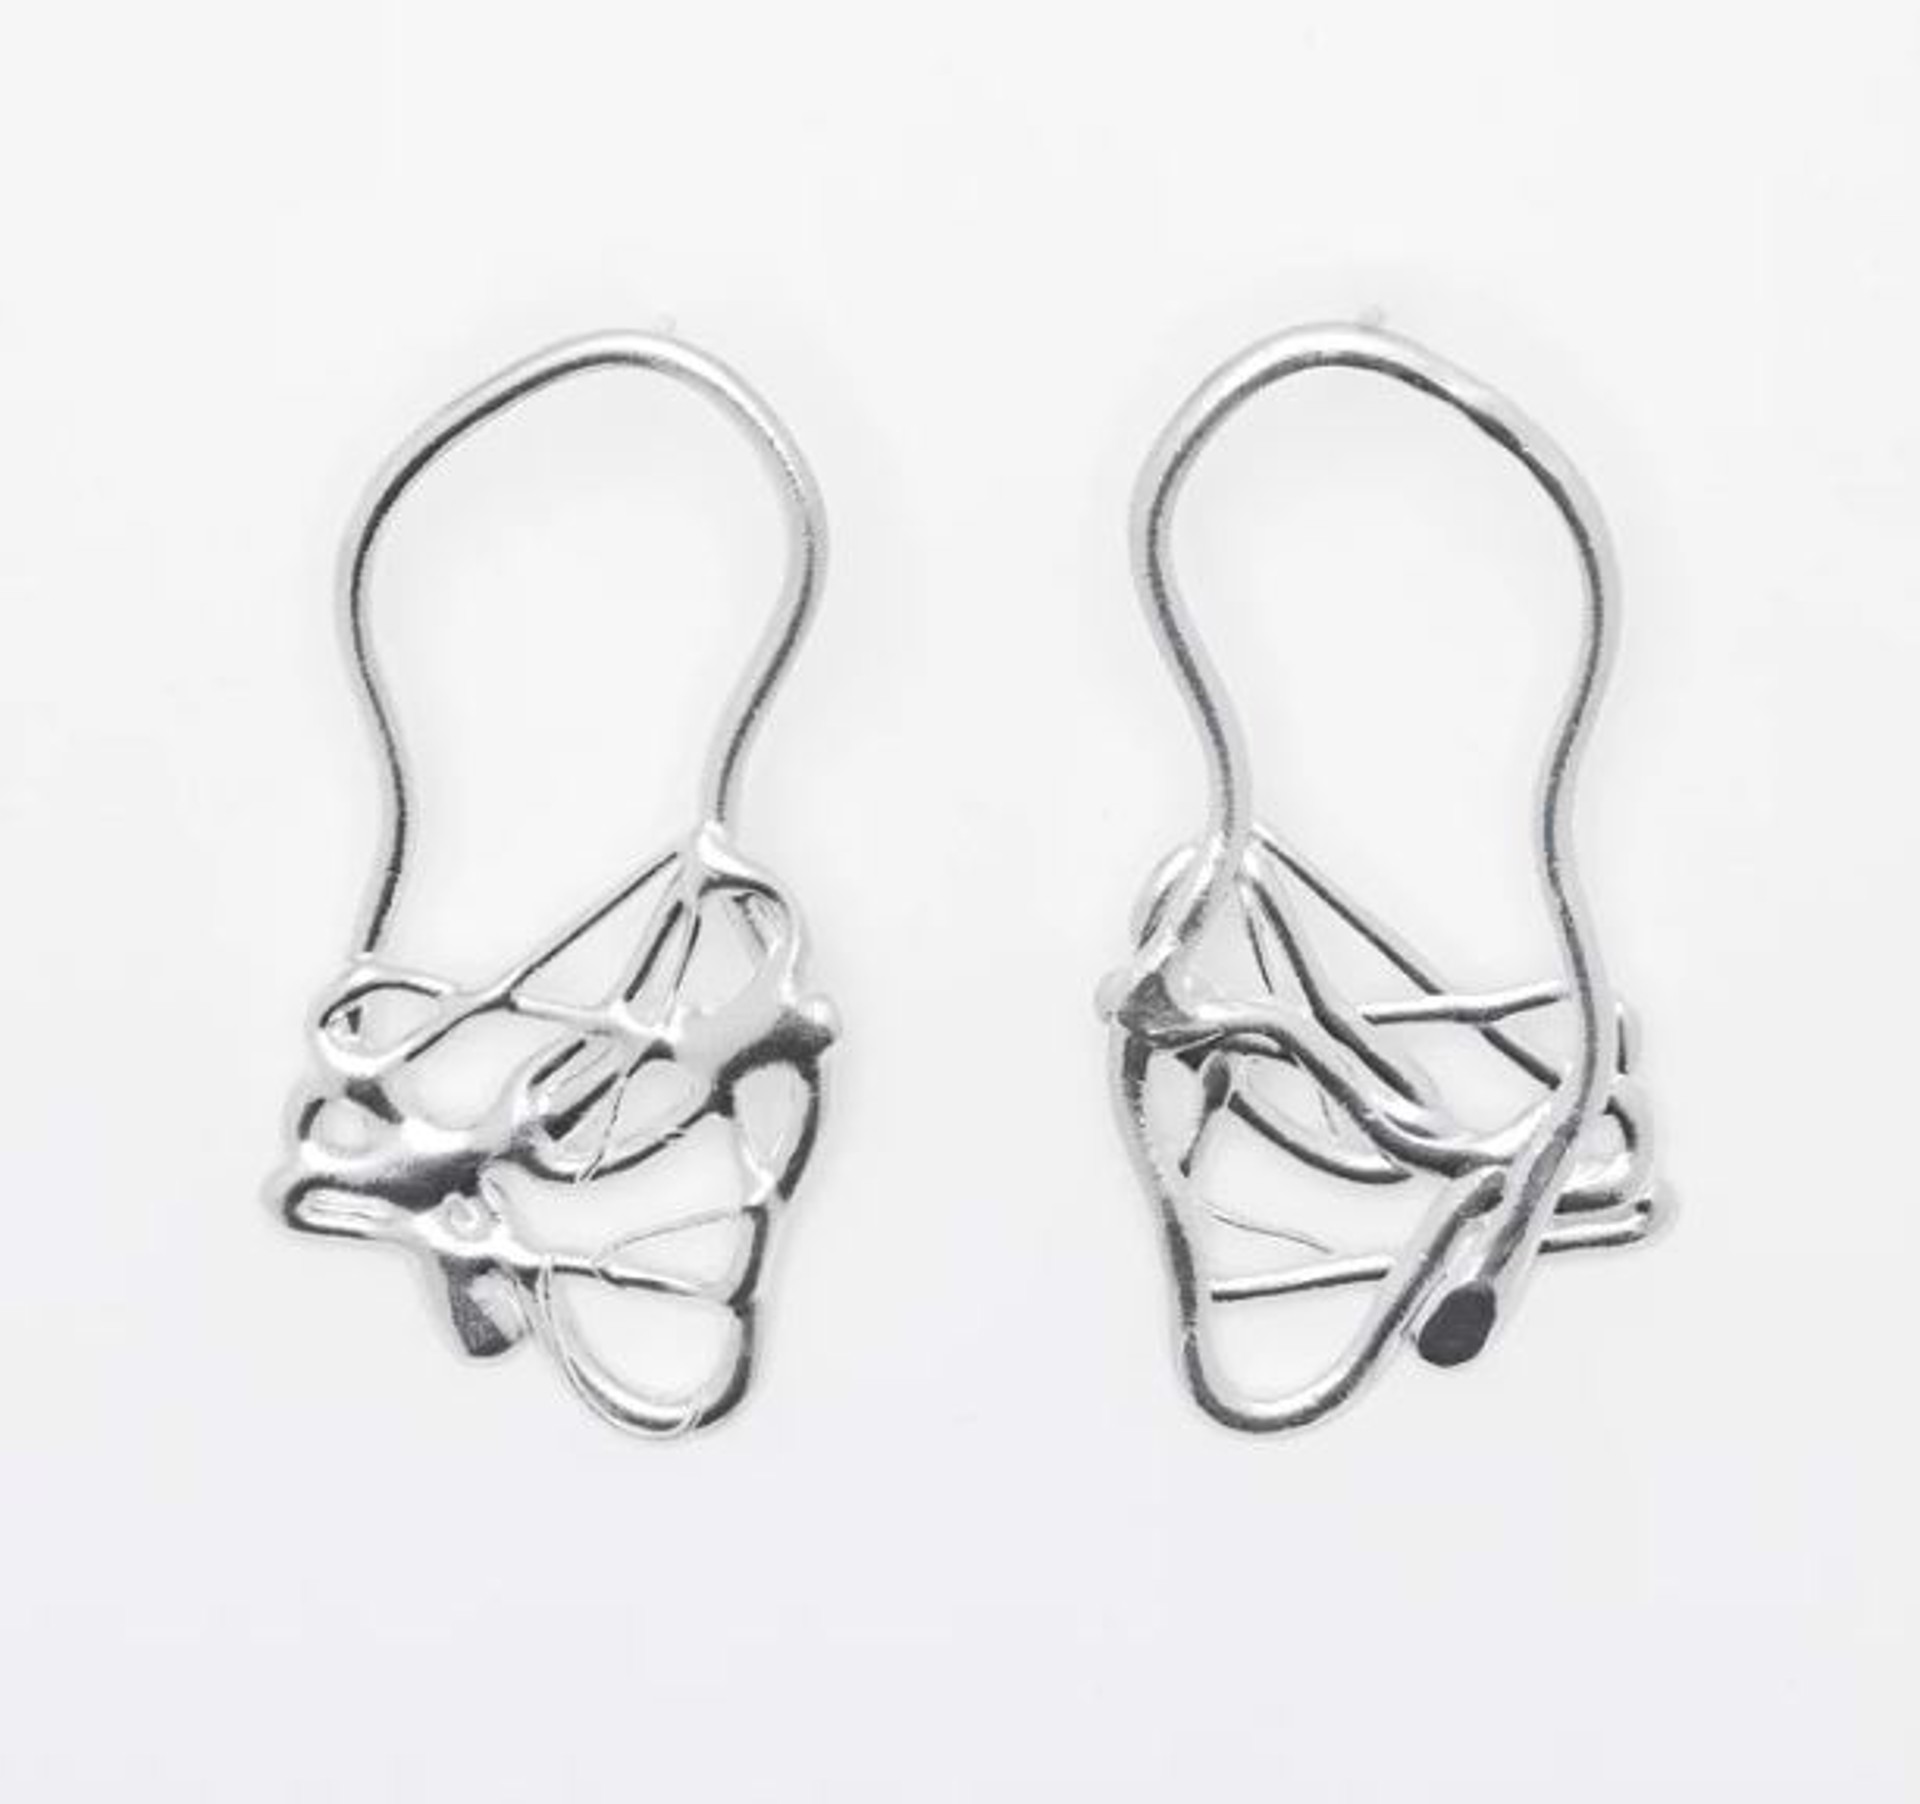 Hydro Oval Earrings - Sterling Silver by Sydnie Wainland